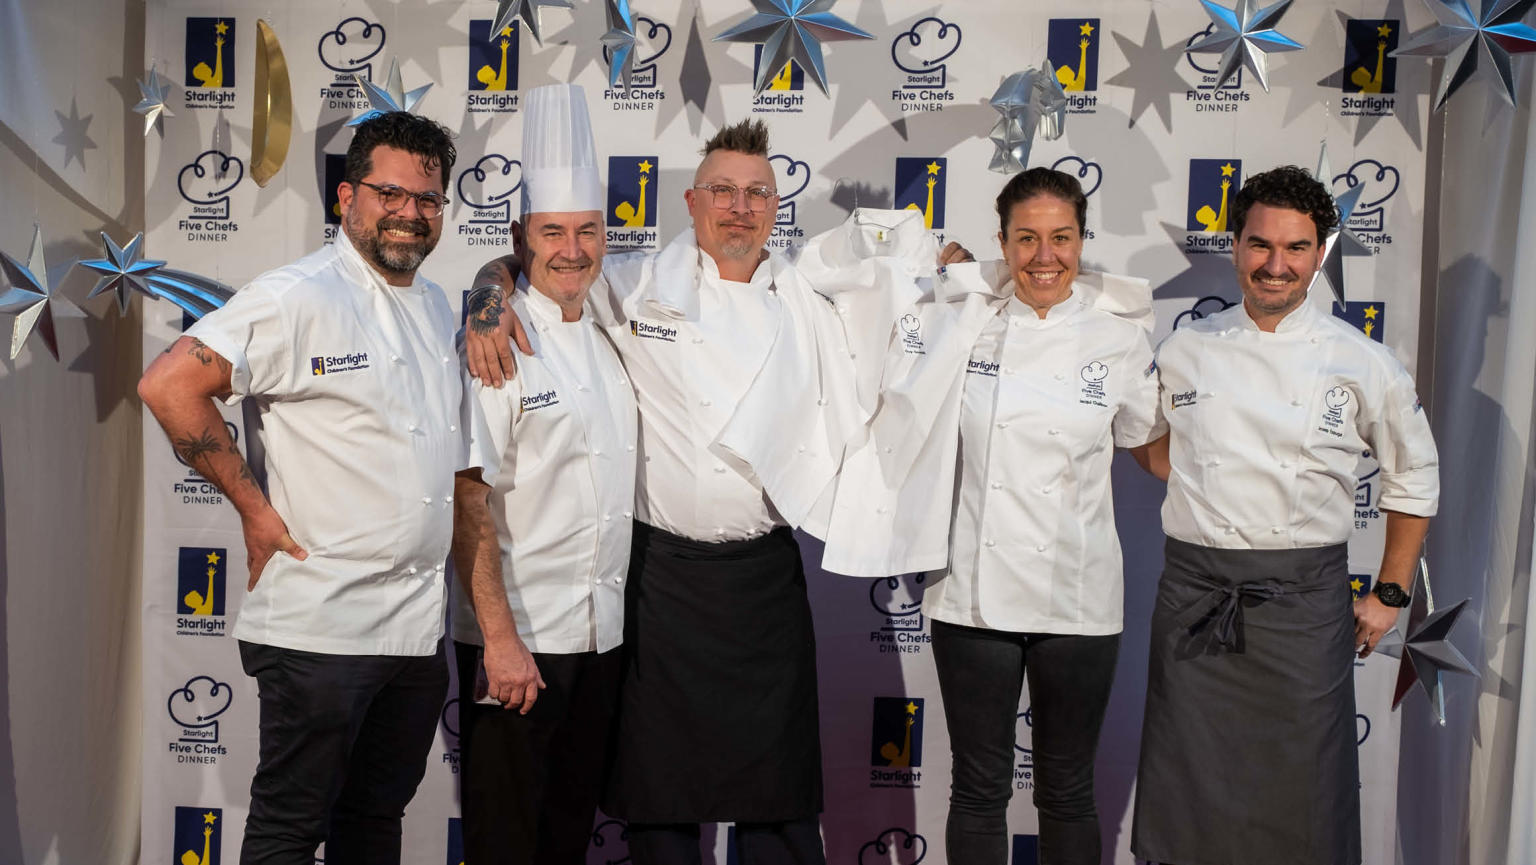 A lineup of five cheerful chefs, standing side by side and proudly holding up a crisp white shirt between two of them. They pose in front of a photo event backdrop, exuding a sense of camaraderie and professional pride.